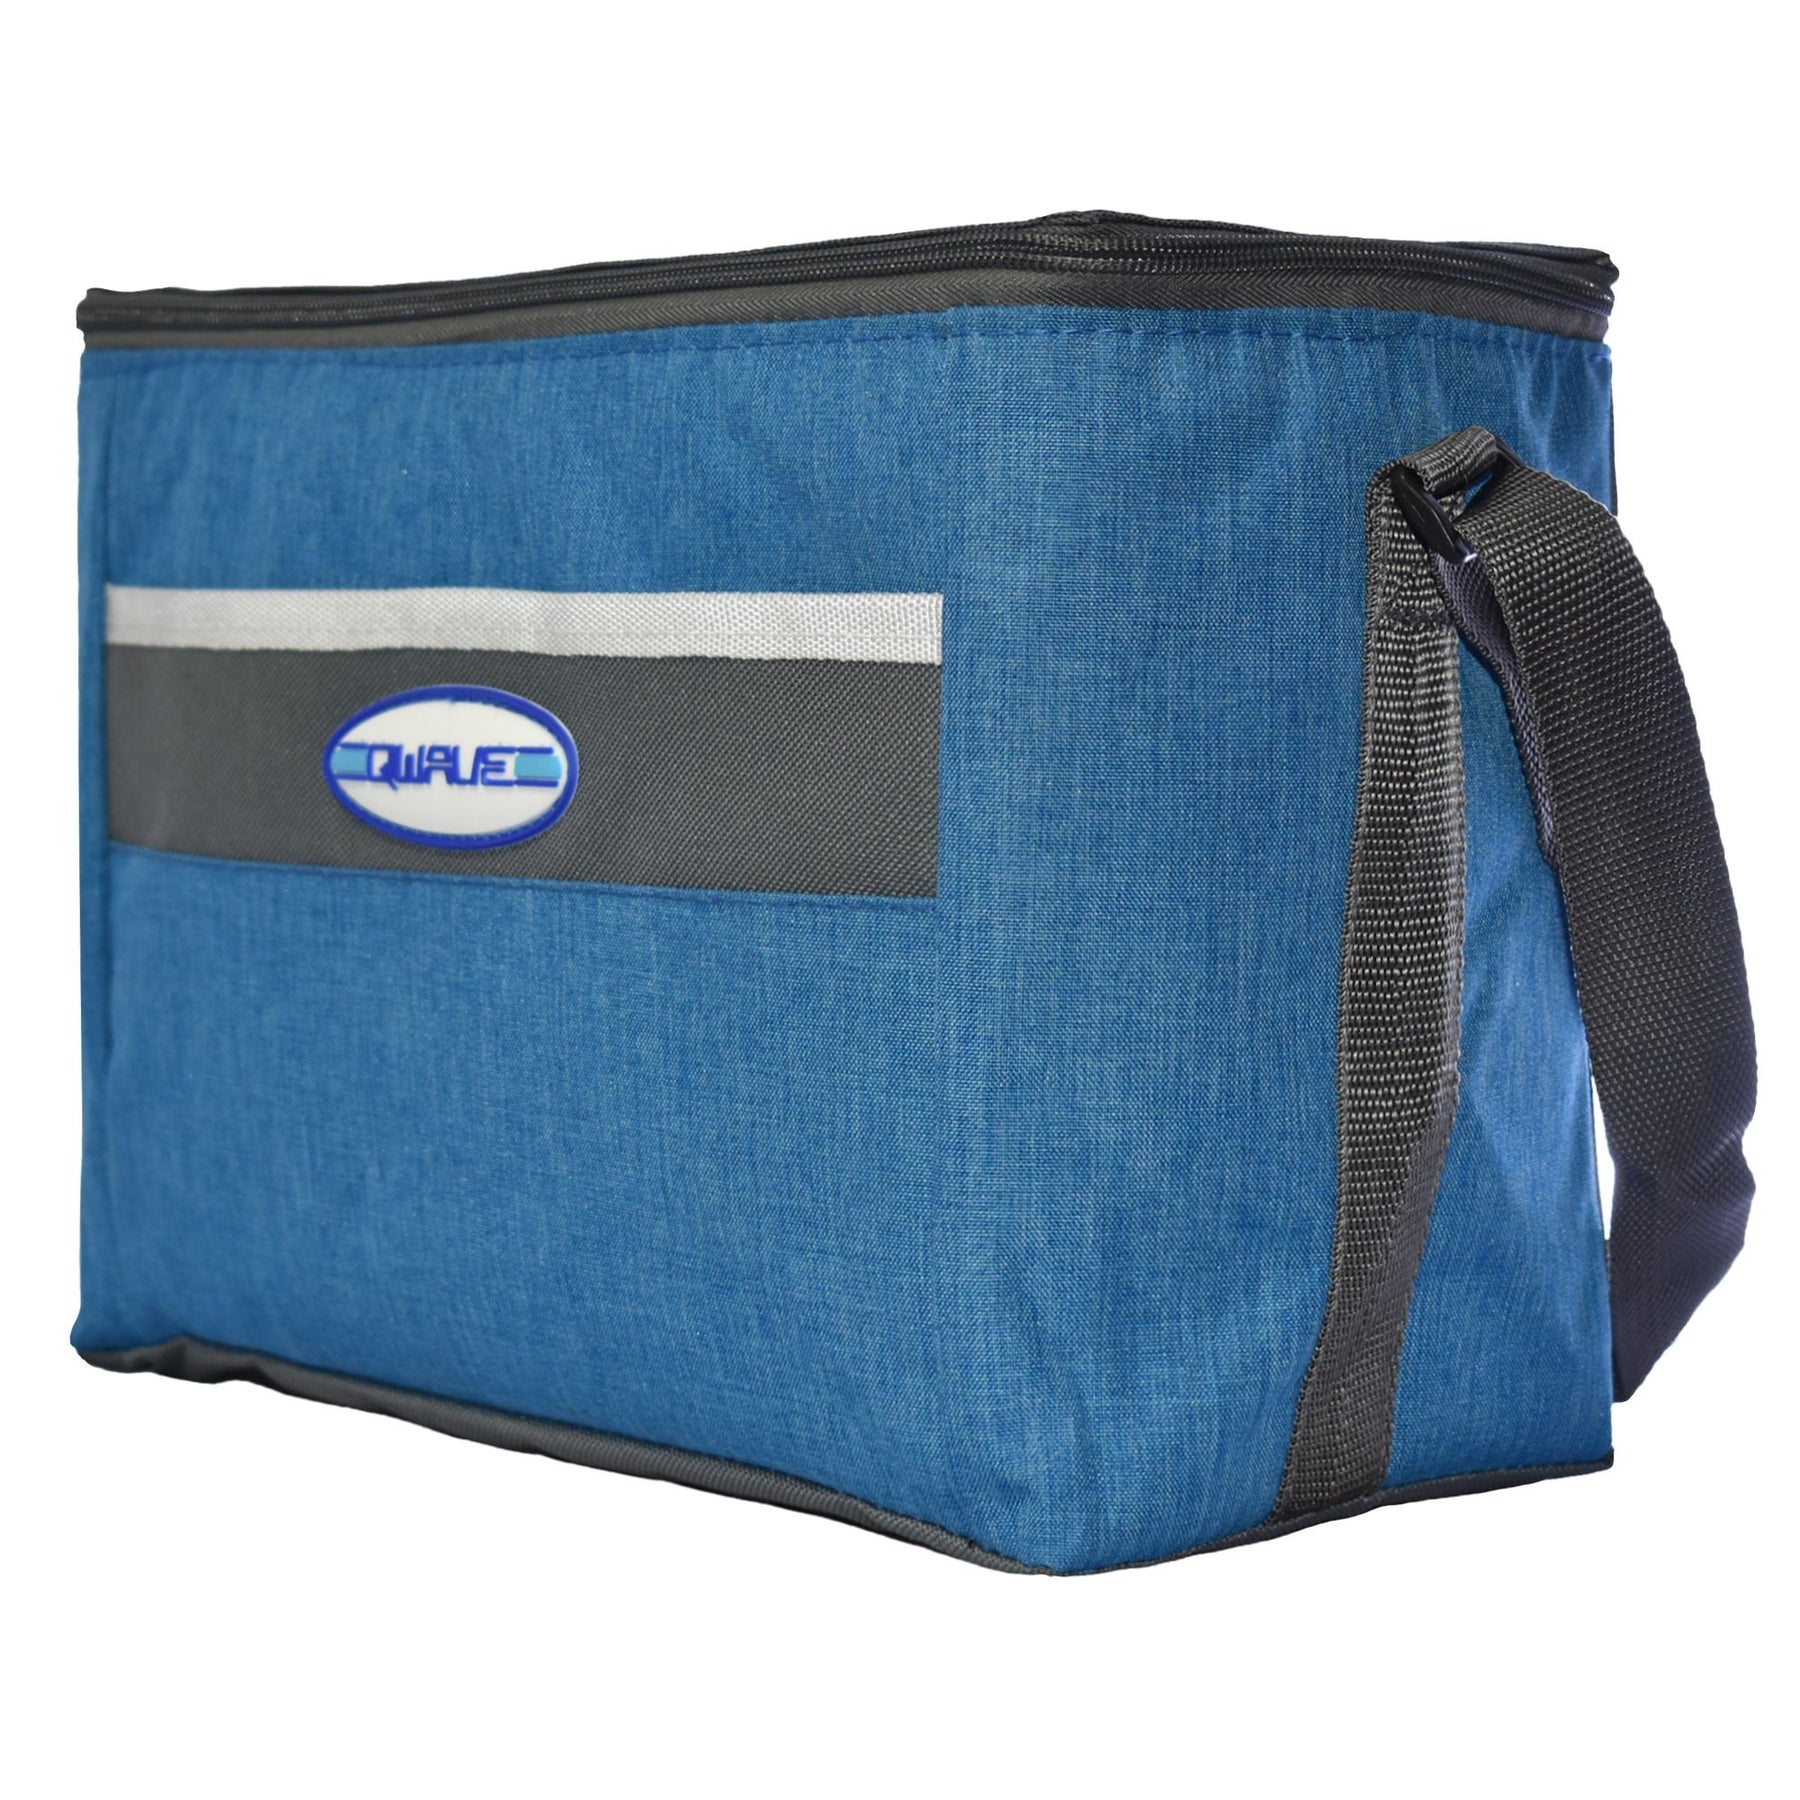 Panama Jack 12 X 9 Insulated Soft Side Cooler